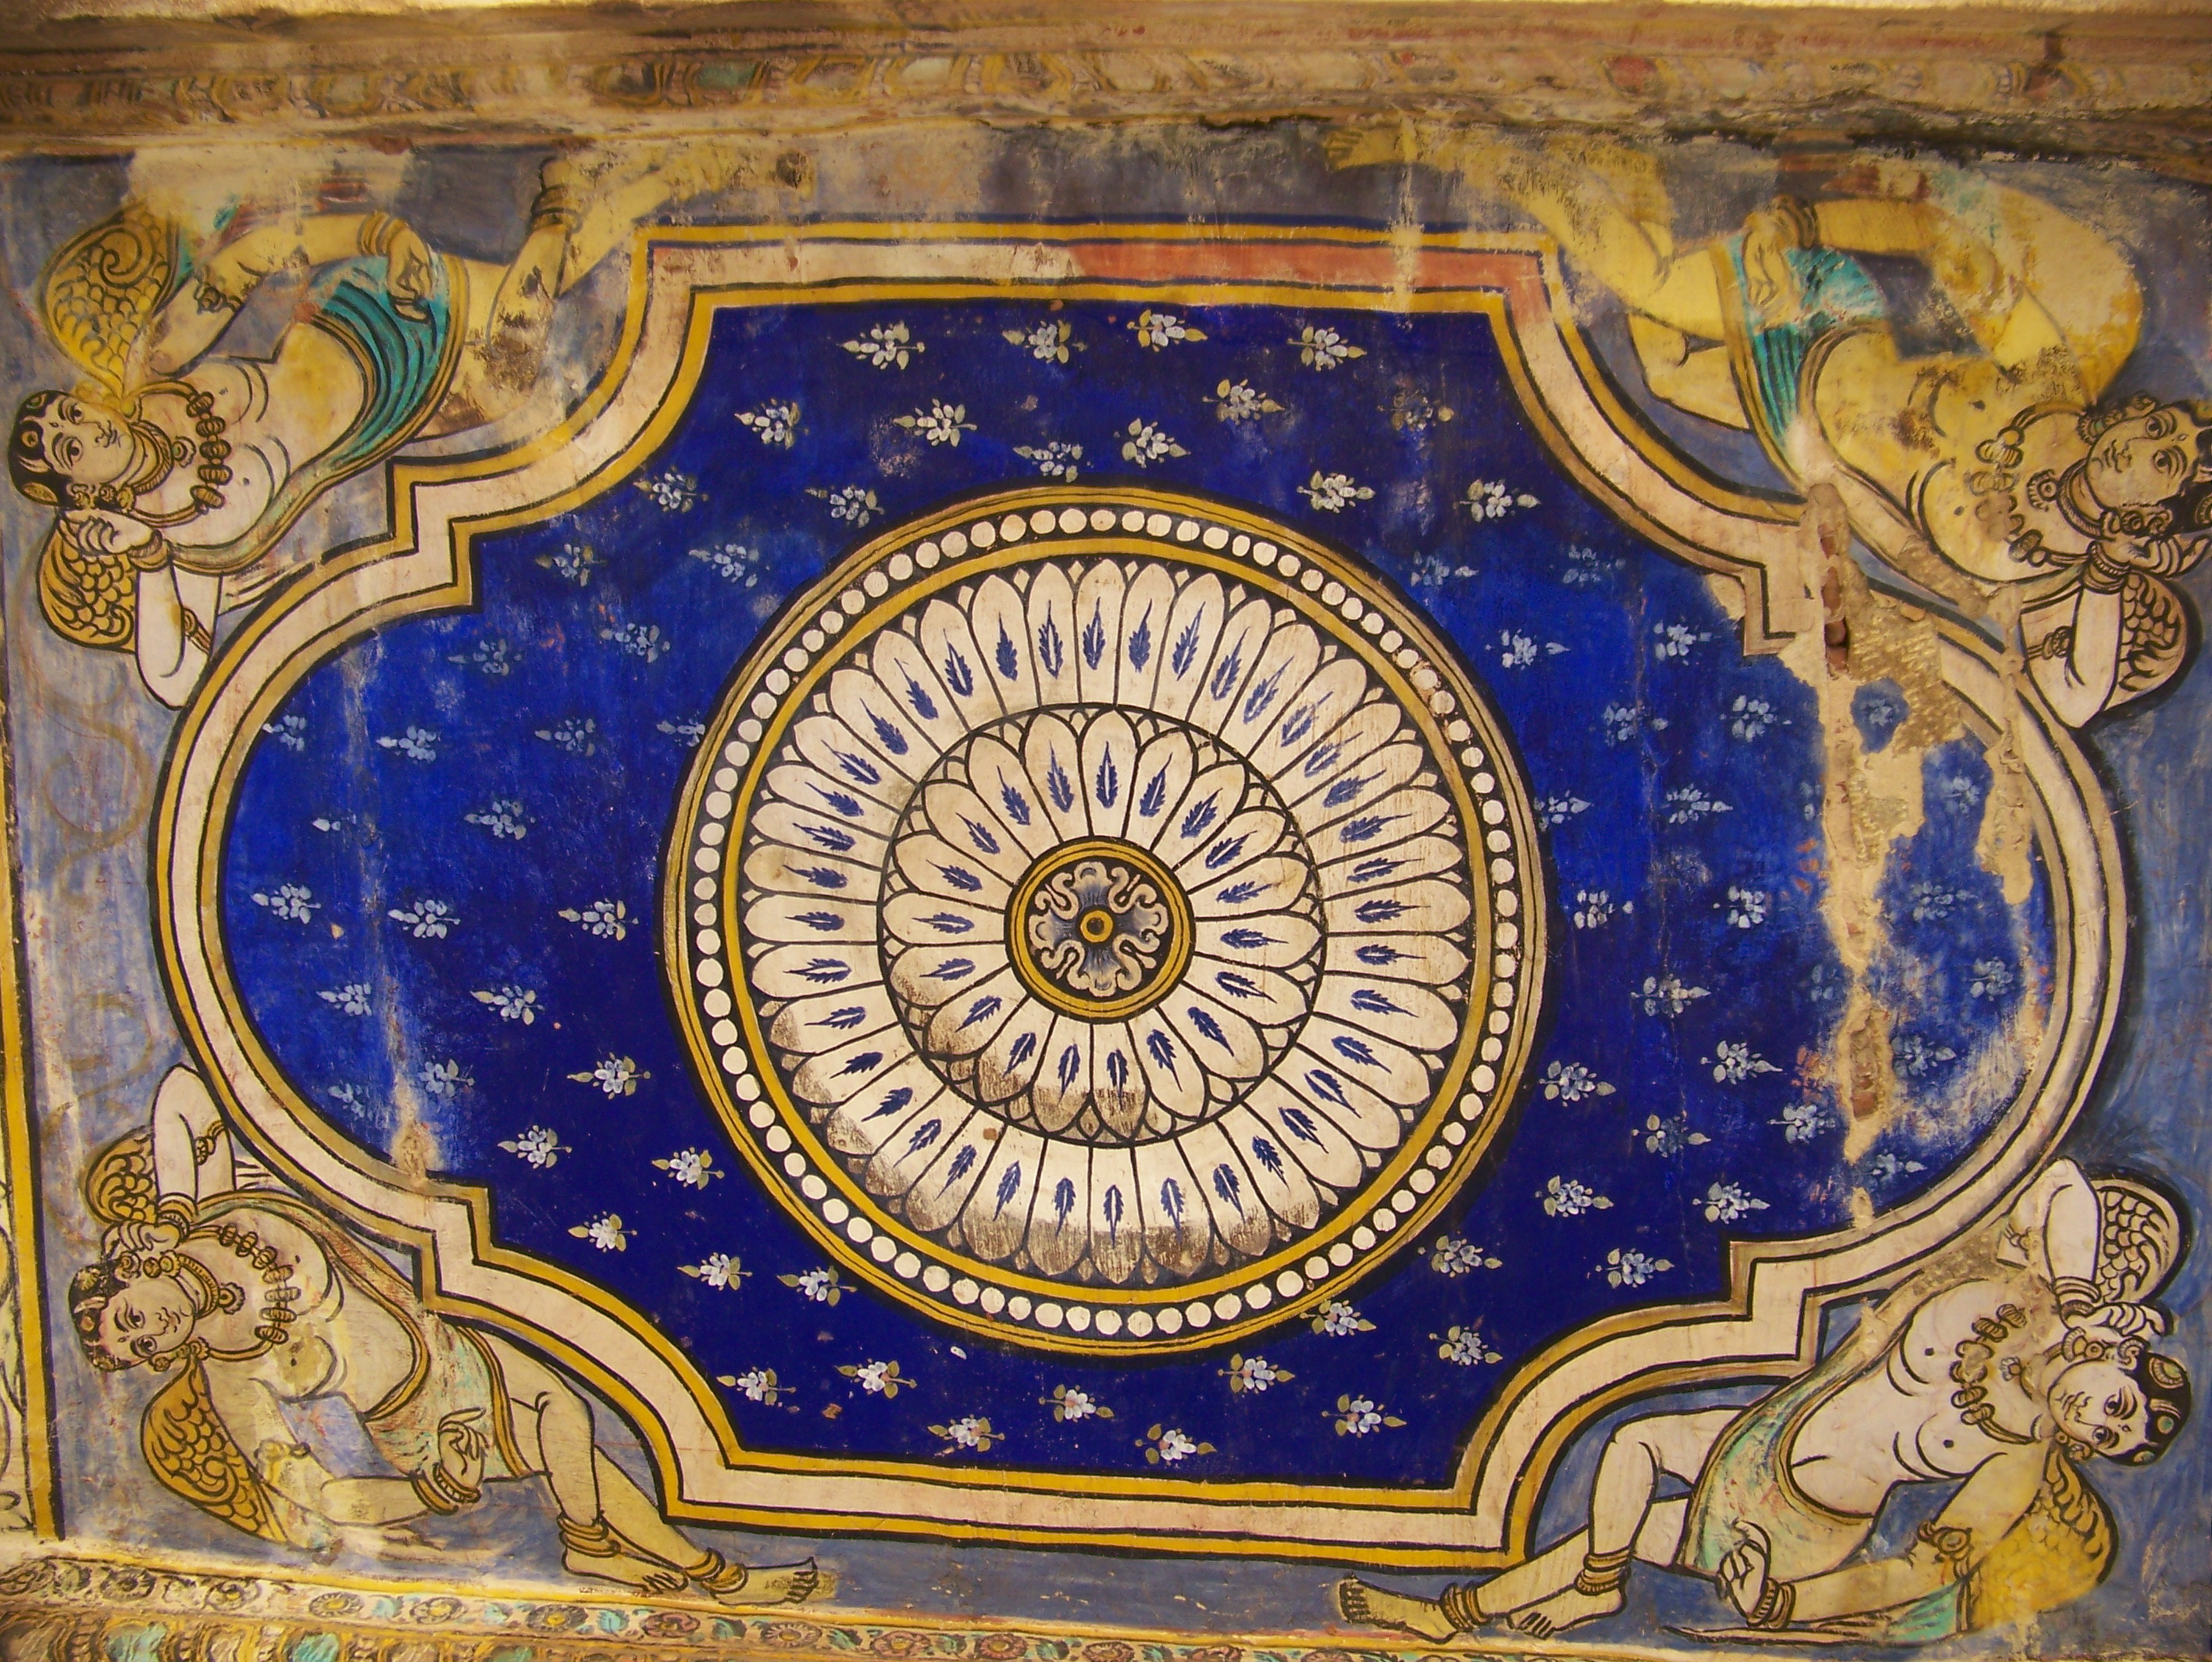 The Tanjavur paintings adorning one of the roofs